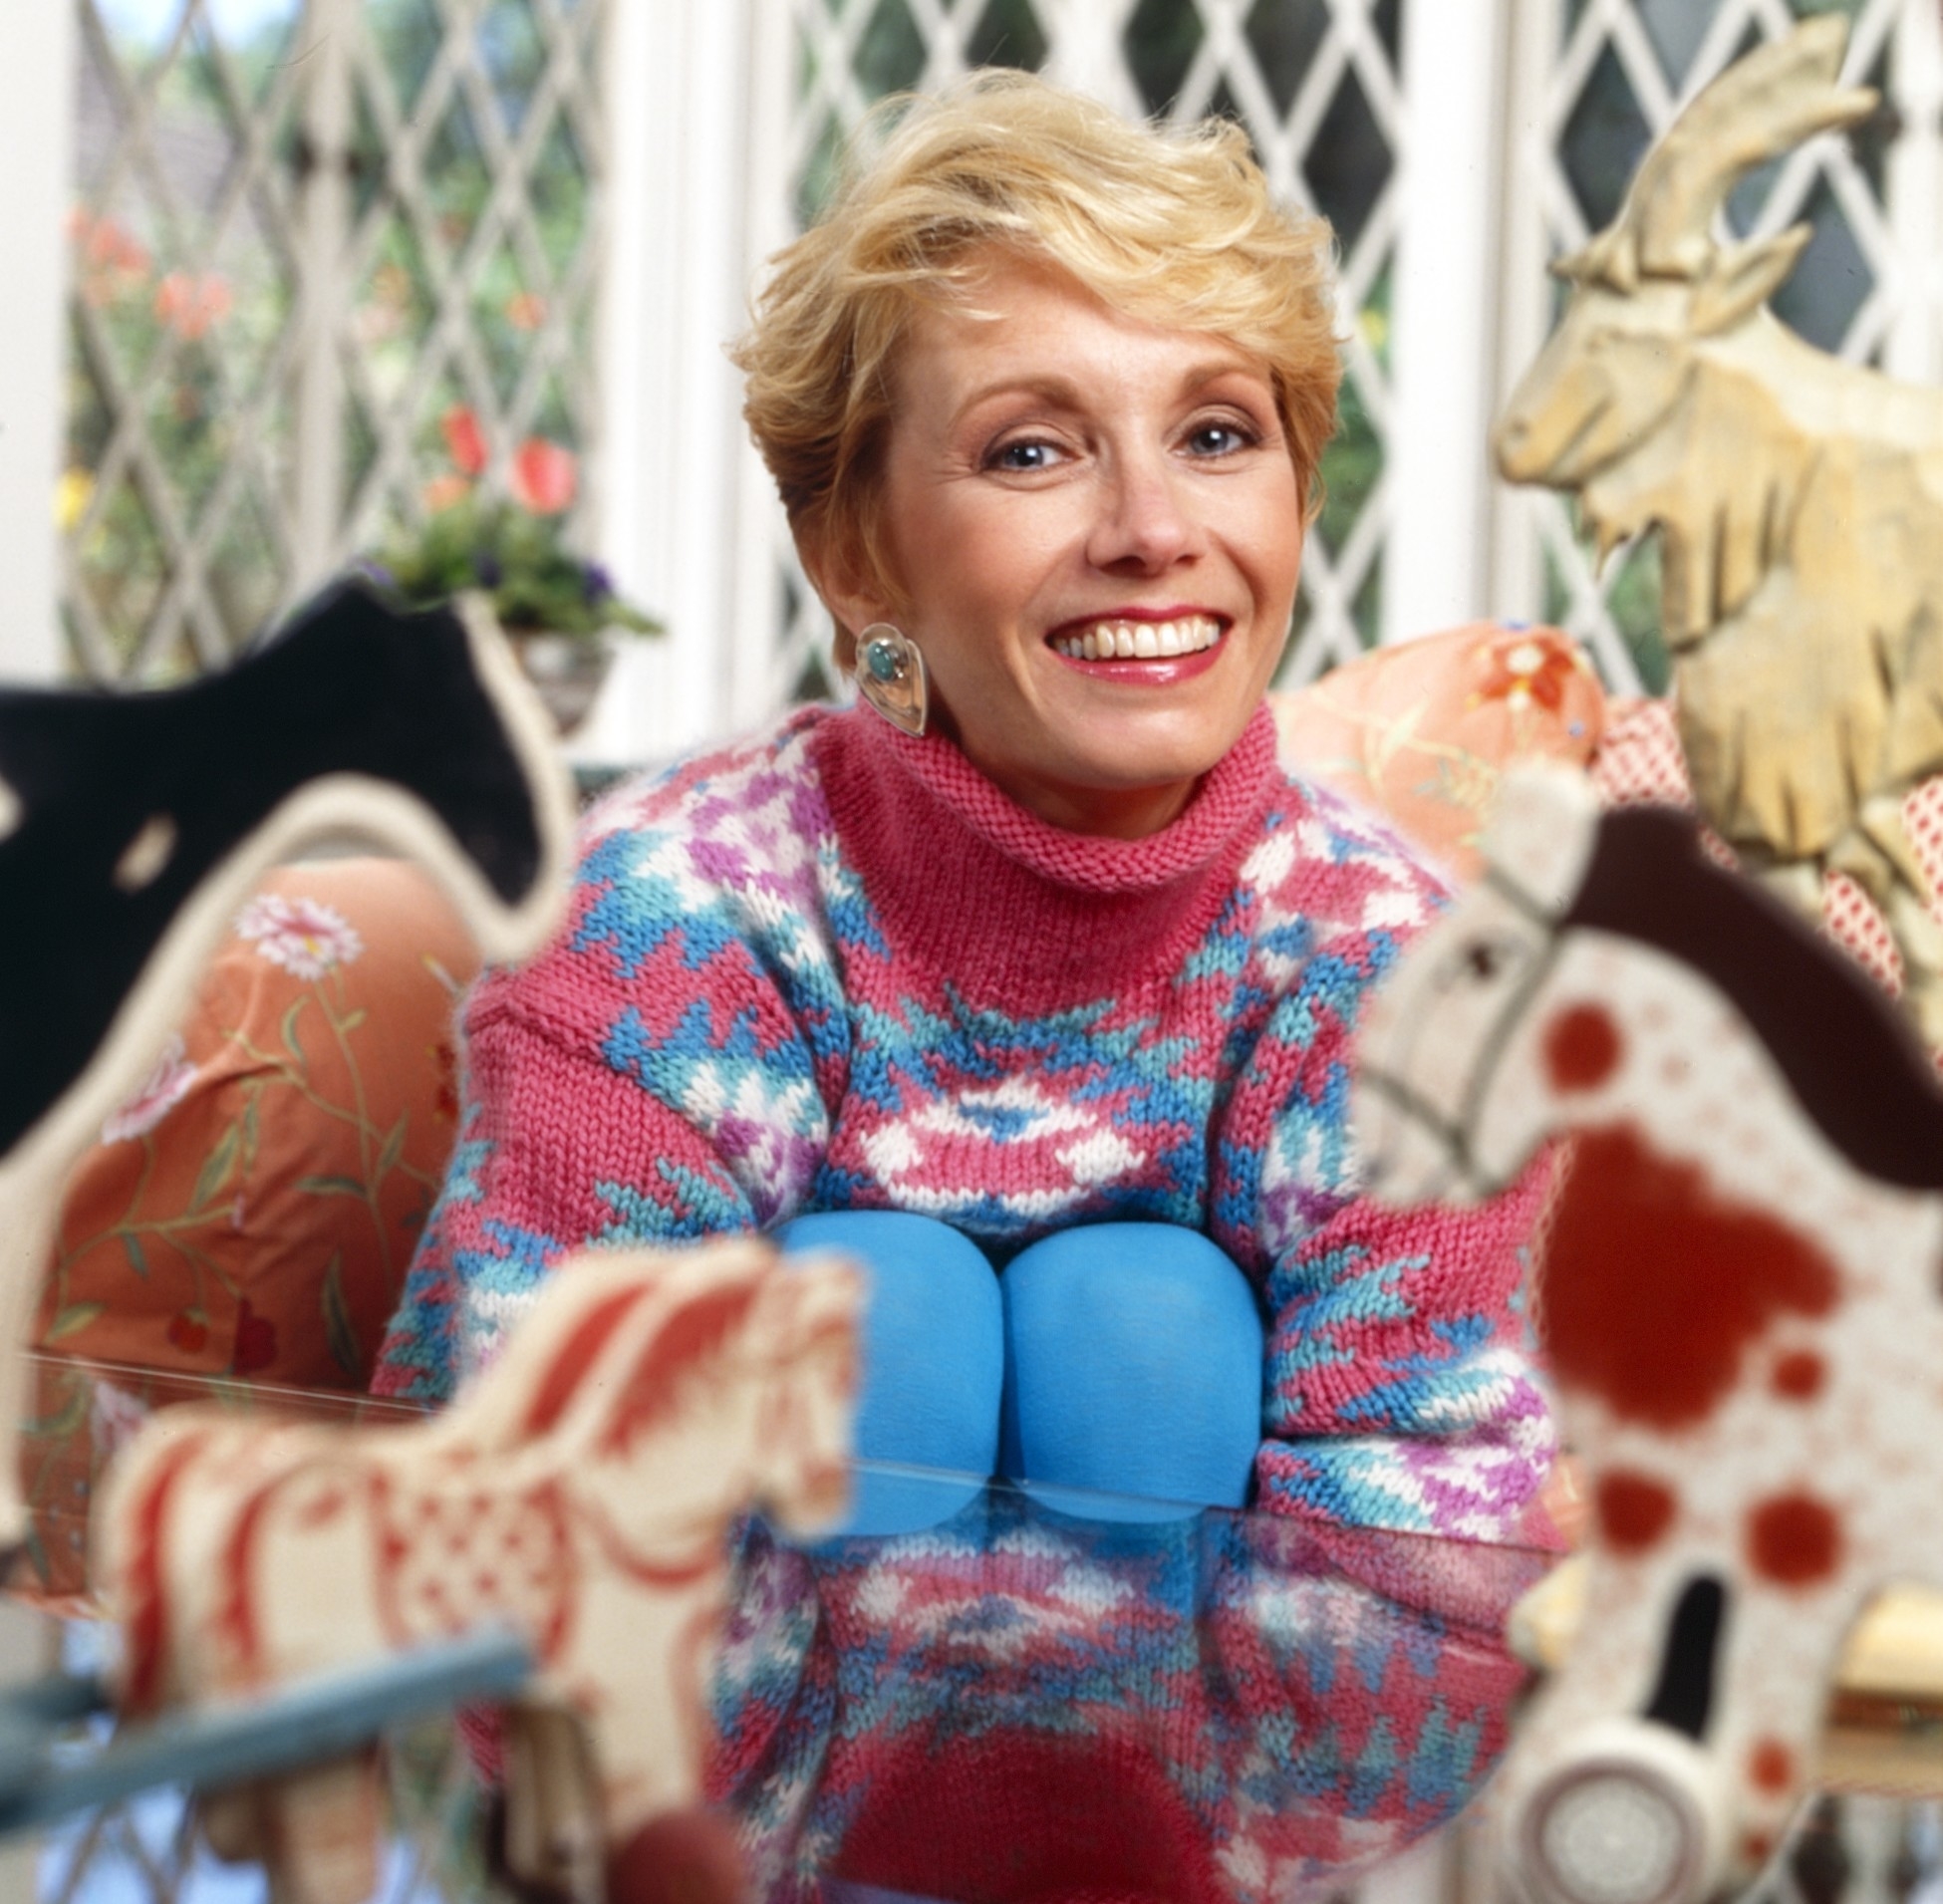 Smiling Sandy with short blonde hair, wearing a patterned sweater. She is surrounded by various wooden animal figurines, including horses and a goat